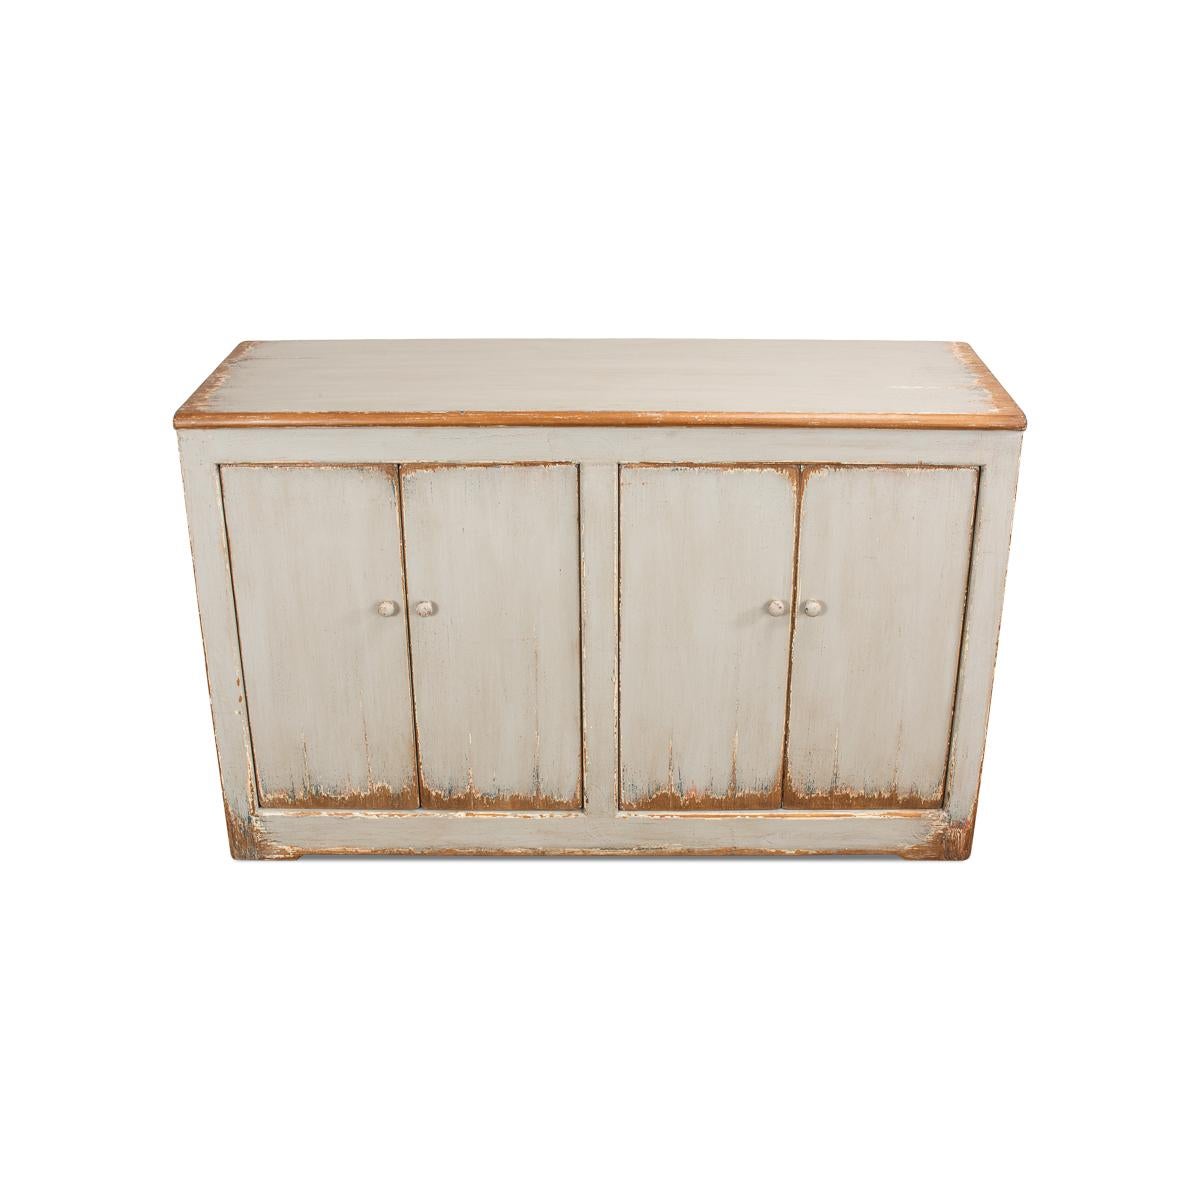 Rustic Country Painted Sideboard In New Condition For Sale In Westwood, NJ